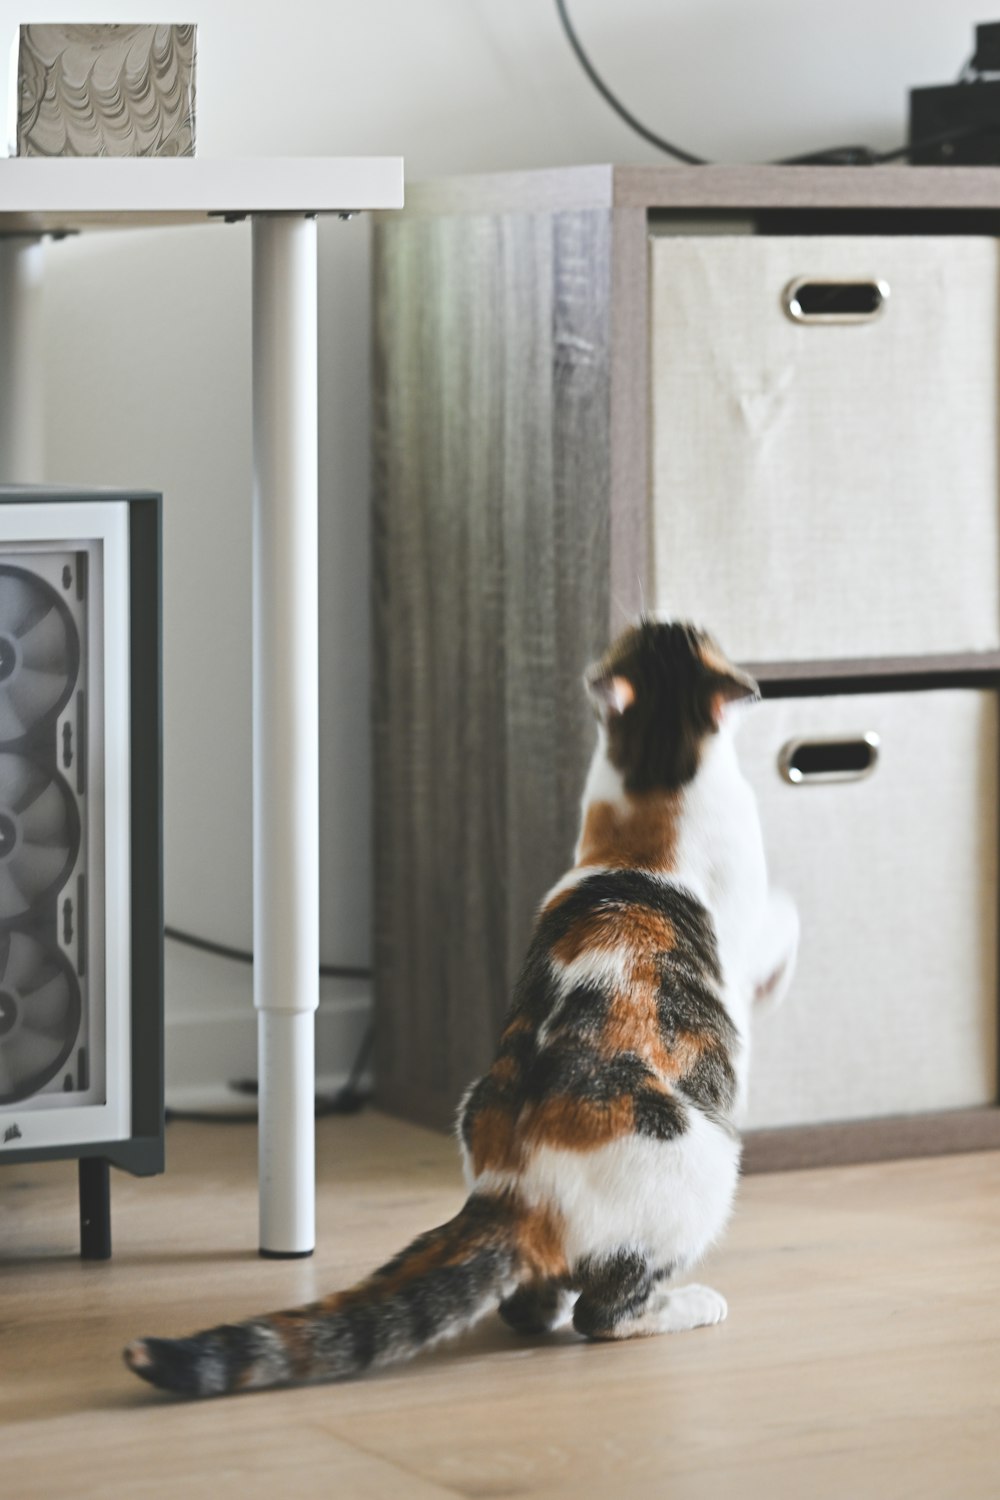 a cat sitting on the floor looking at a television